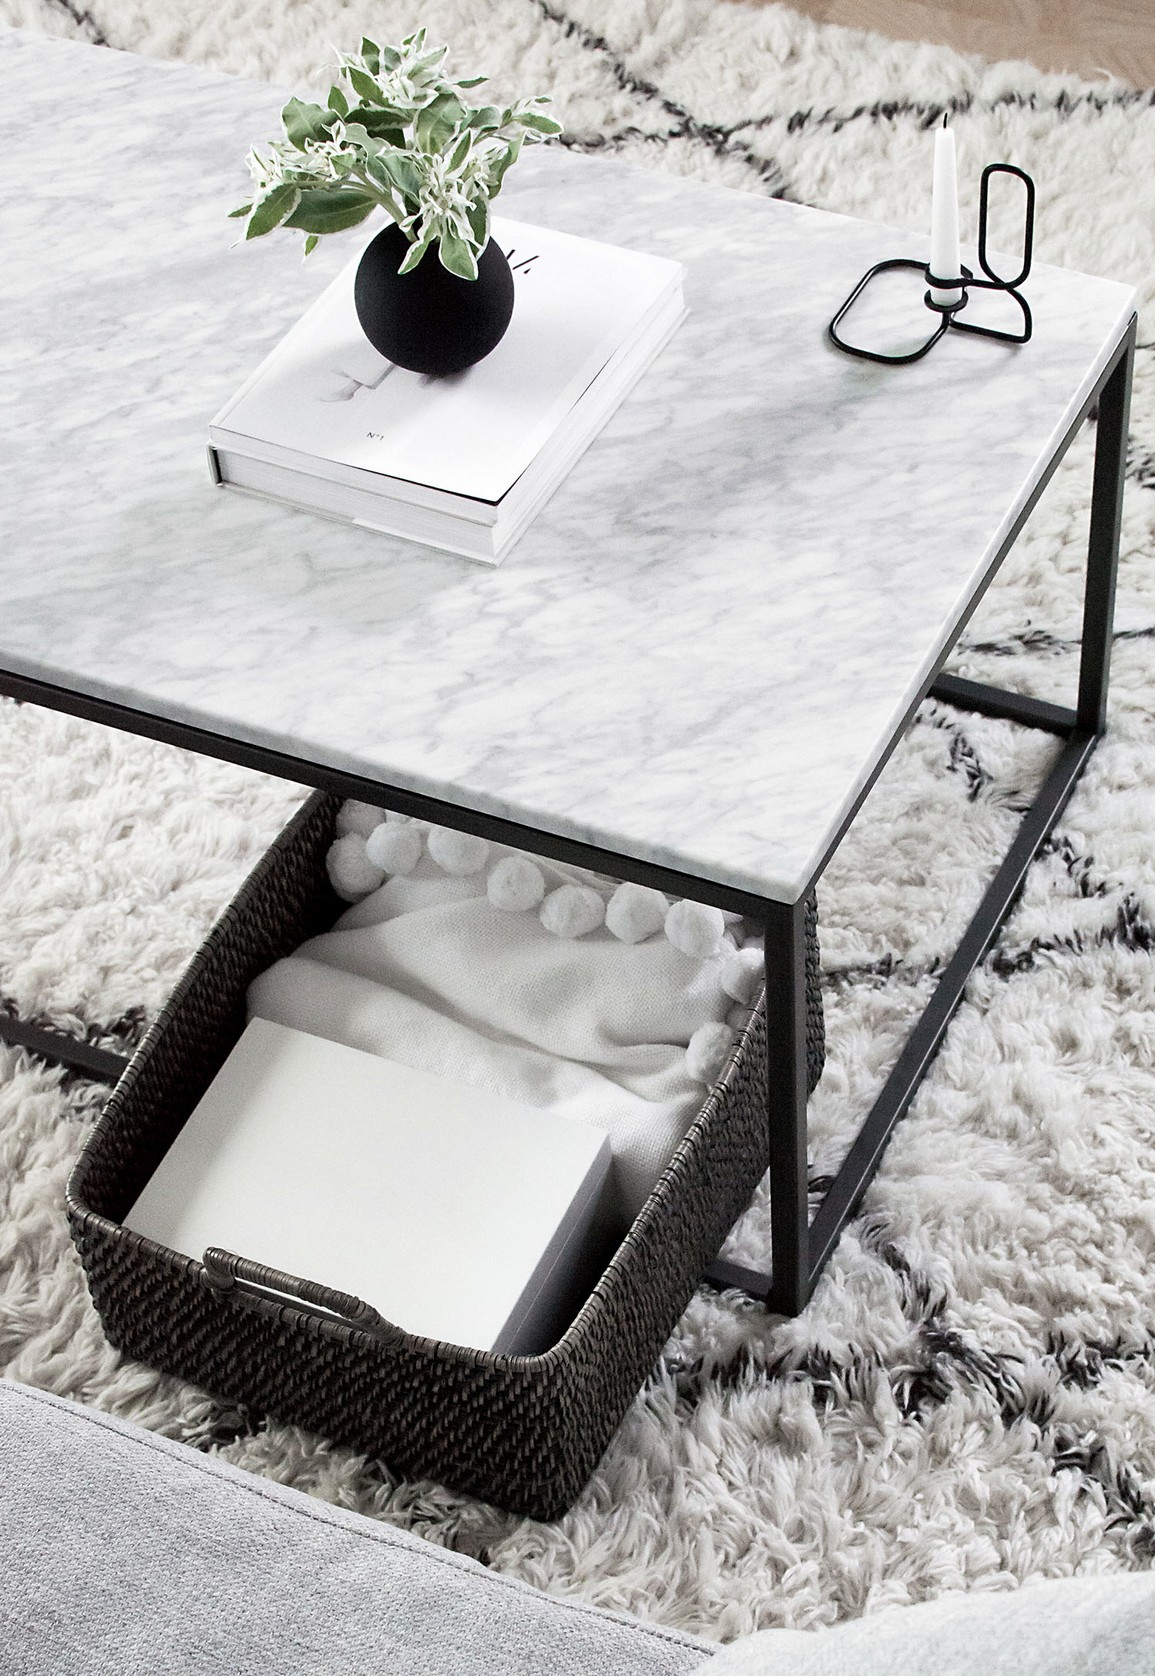 Modern Living With a White Marble Center Table | If you're a lover of minimalist designs, then this is a great inspiration for you! #interiordesign #centertable #homedecor #minimalistdesign